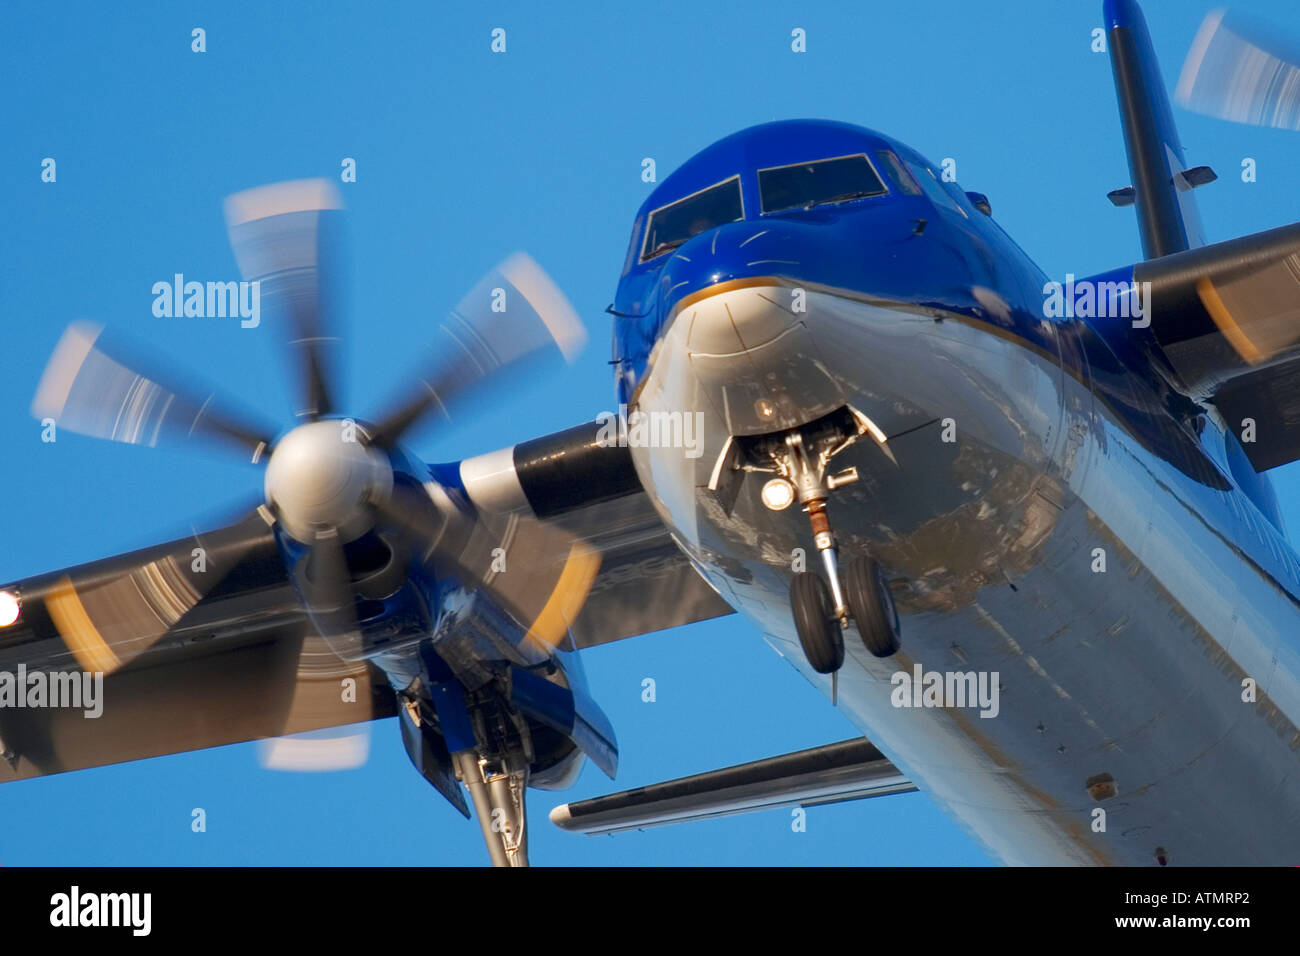 Close-up of regional propeller airplane Stock Photo